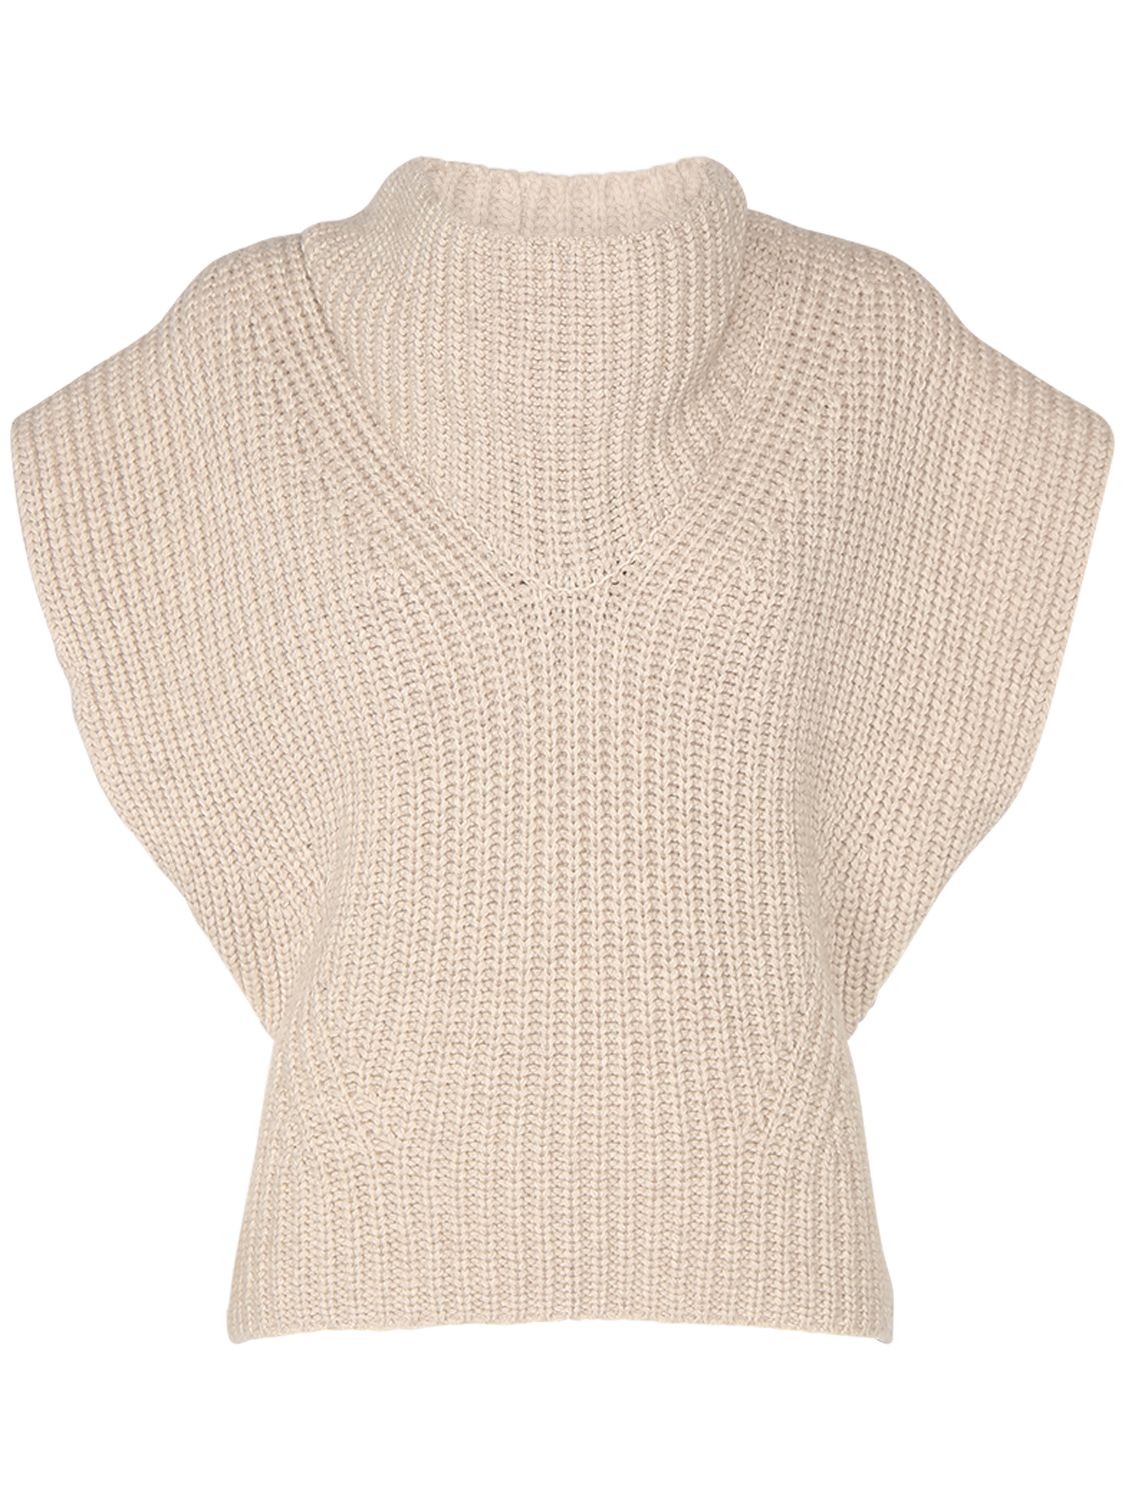 Laos Mohair & Cashmere Sweater